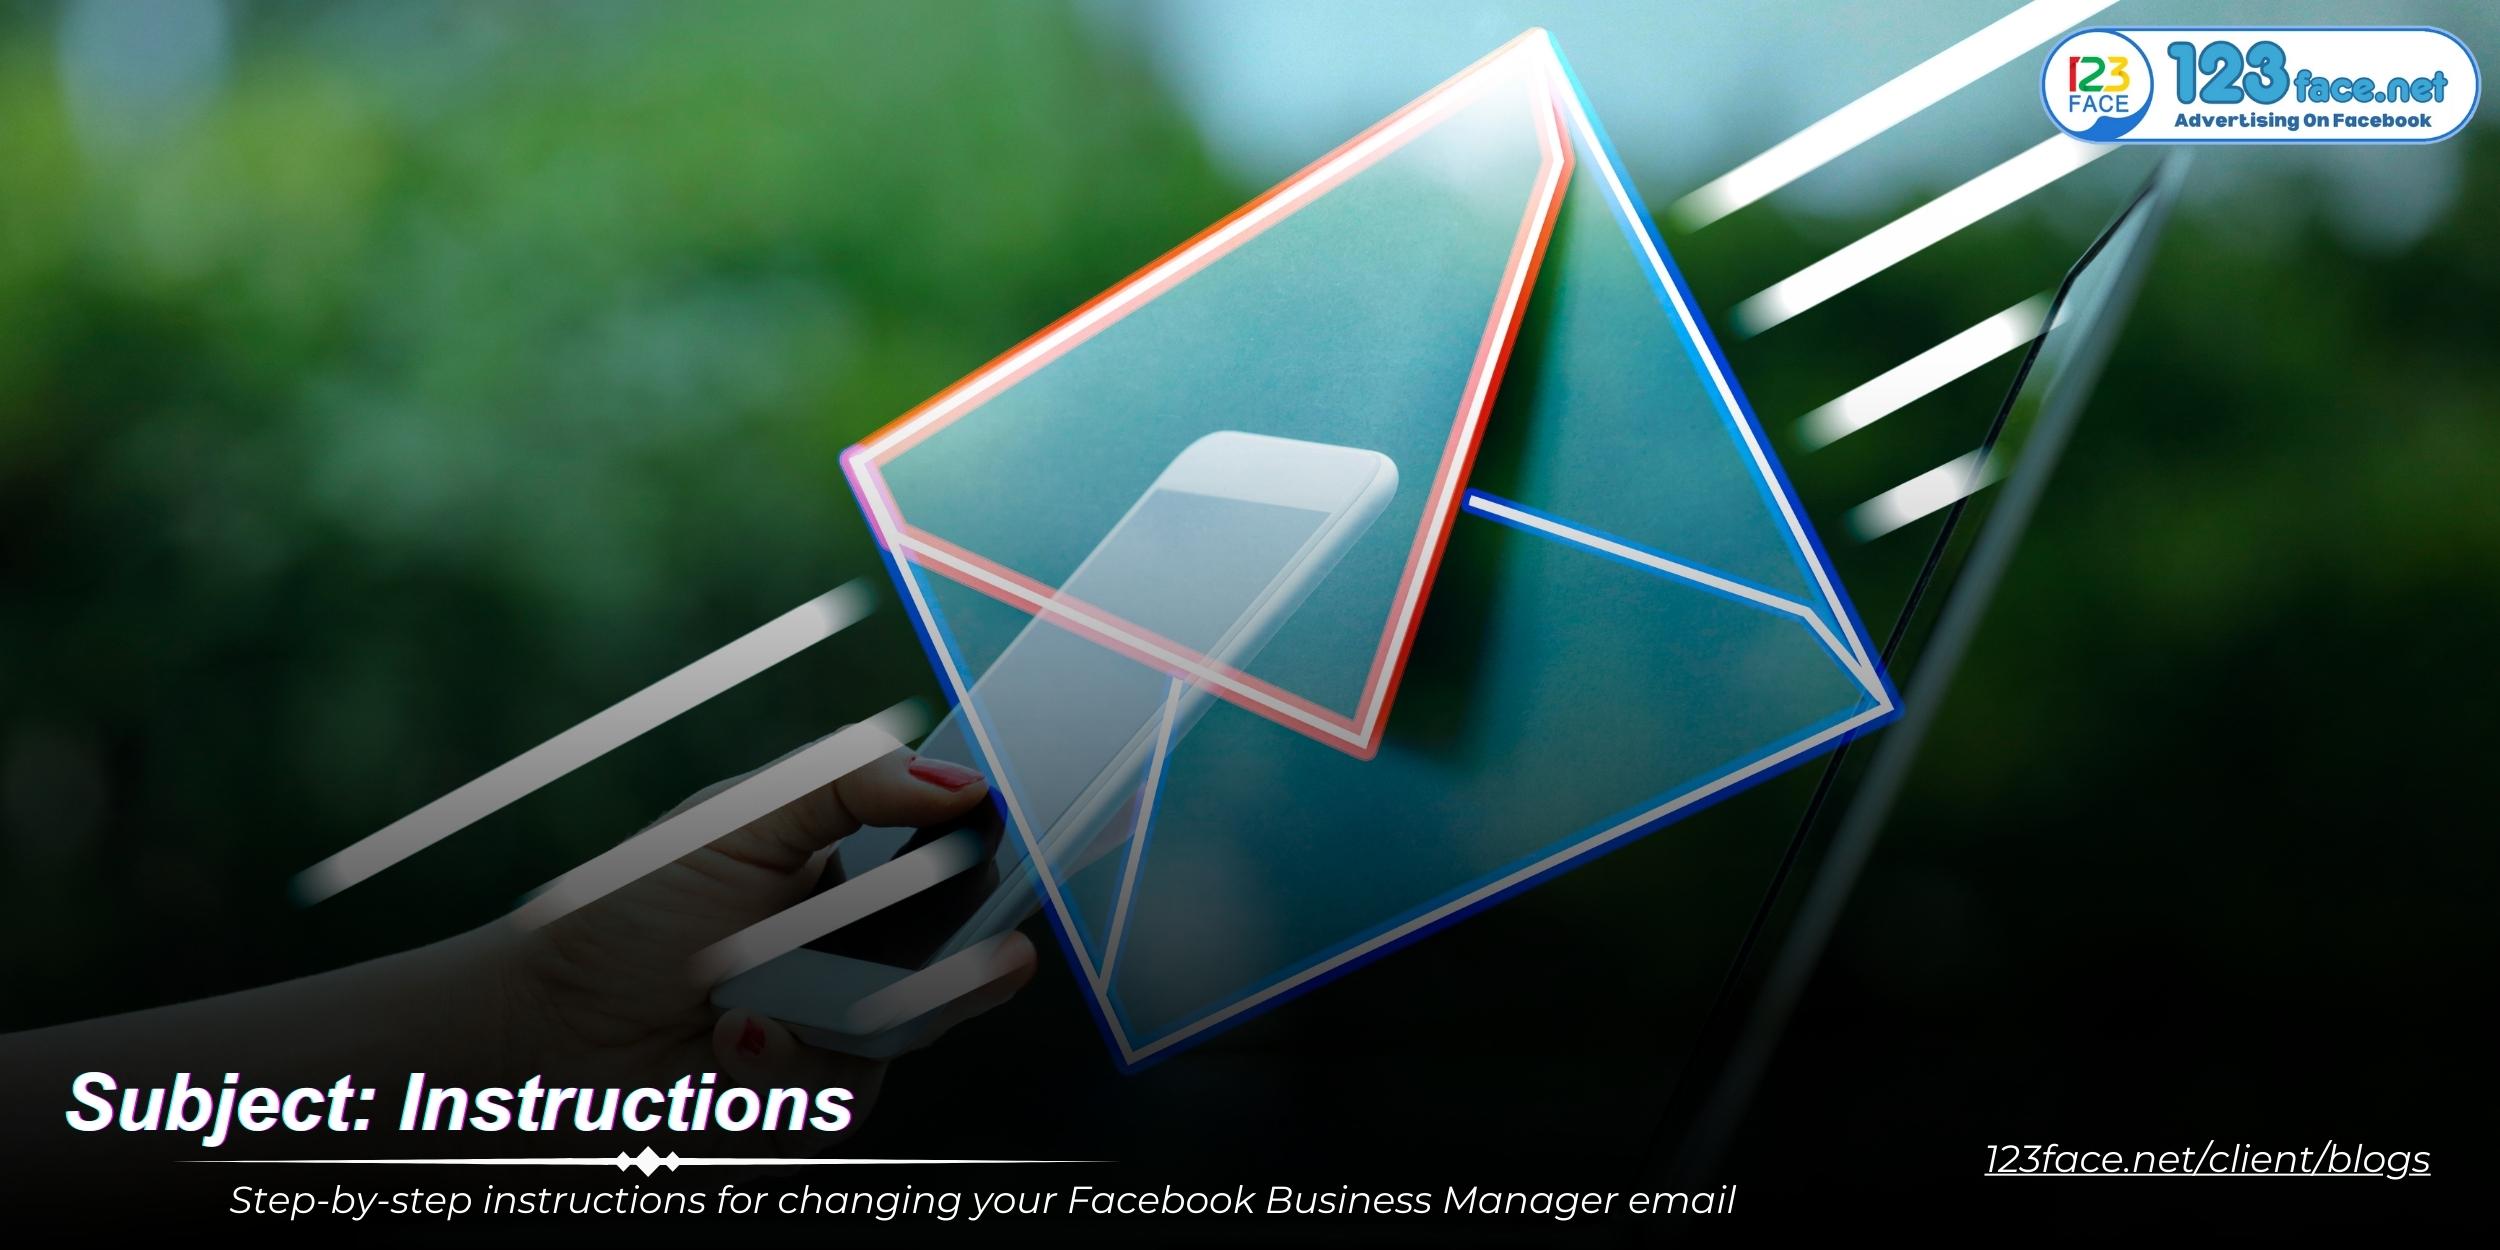 Step-by-step instructions for changing your Facebook Business Manager email